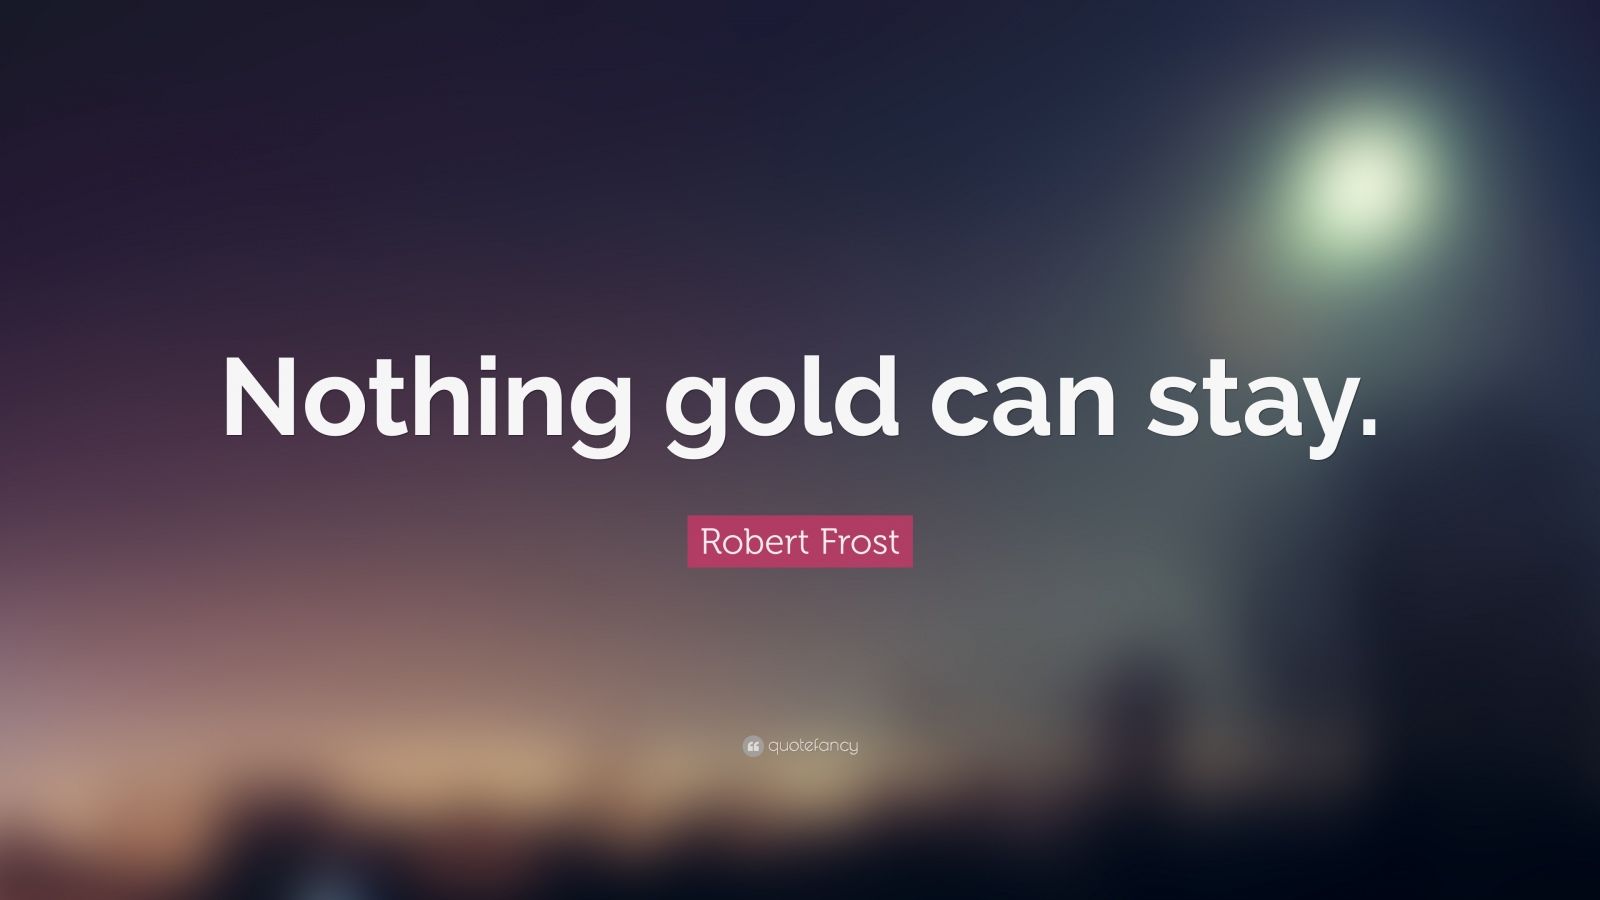 Nothing Gold Can Stay Poem